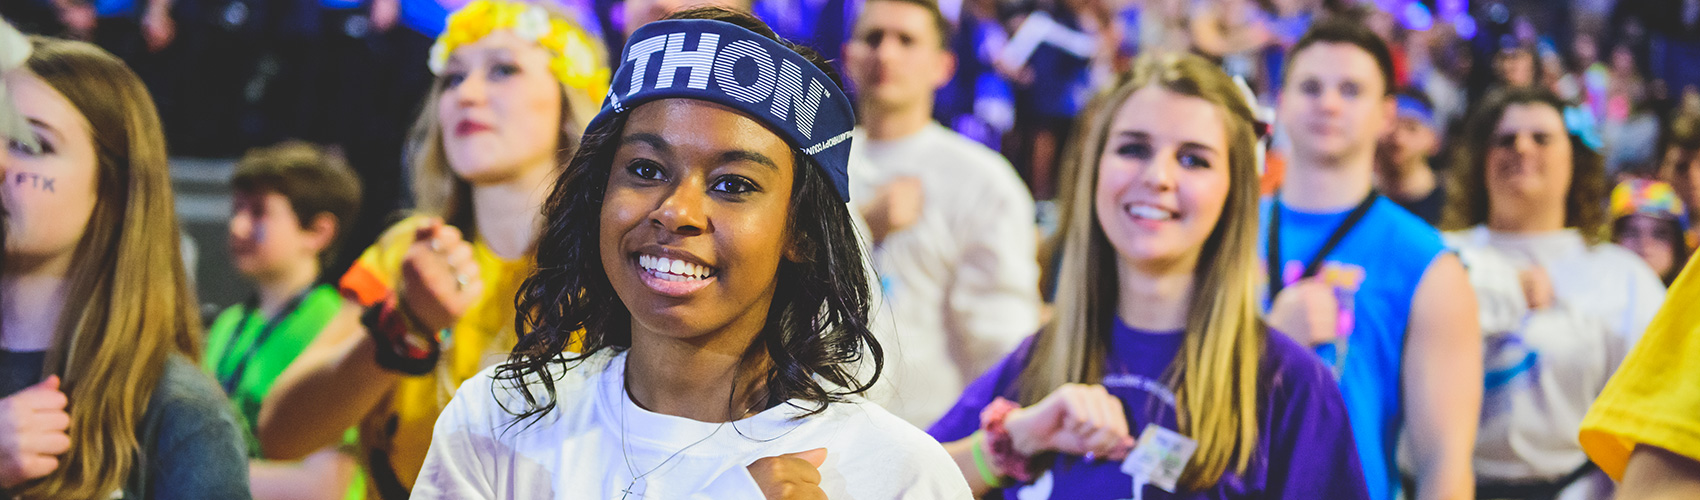 Student at THON with hand on heart